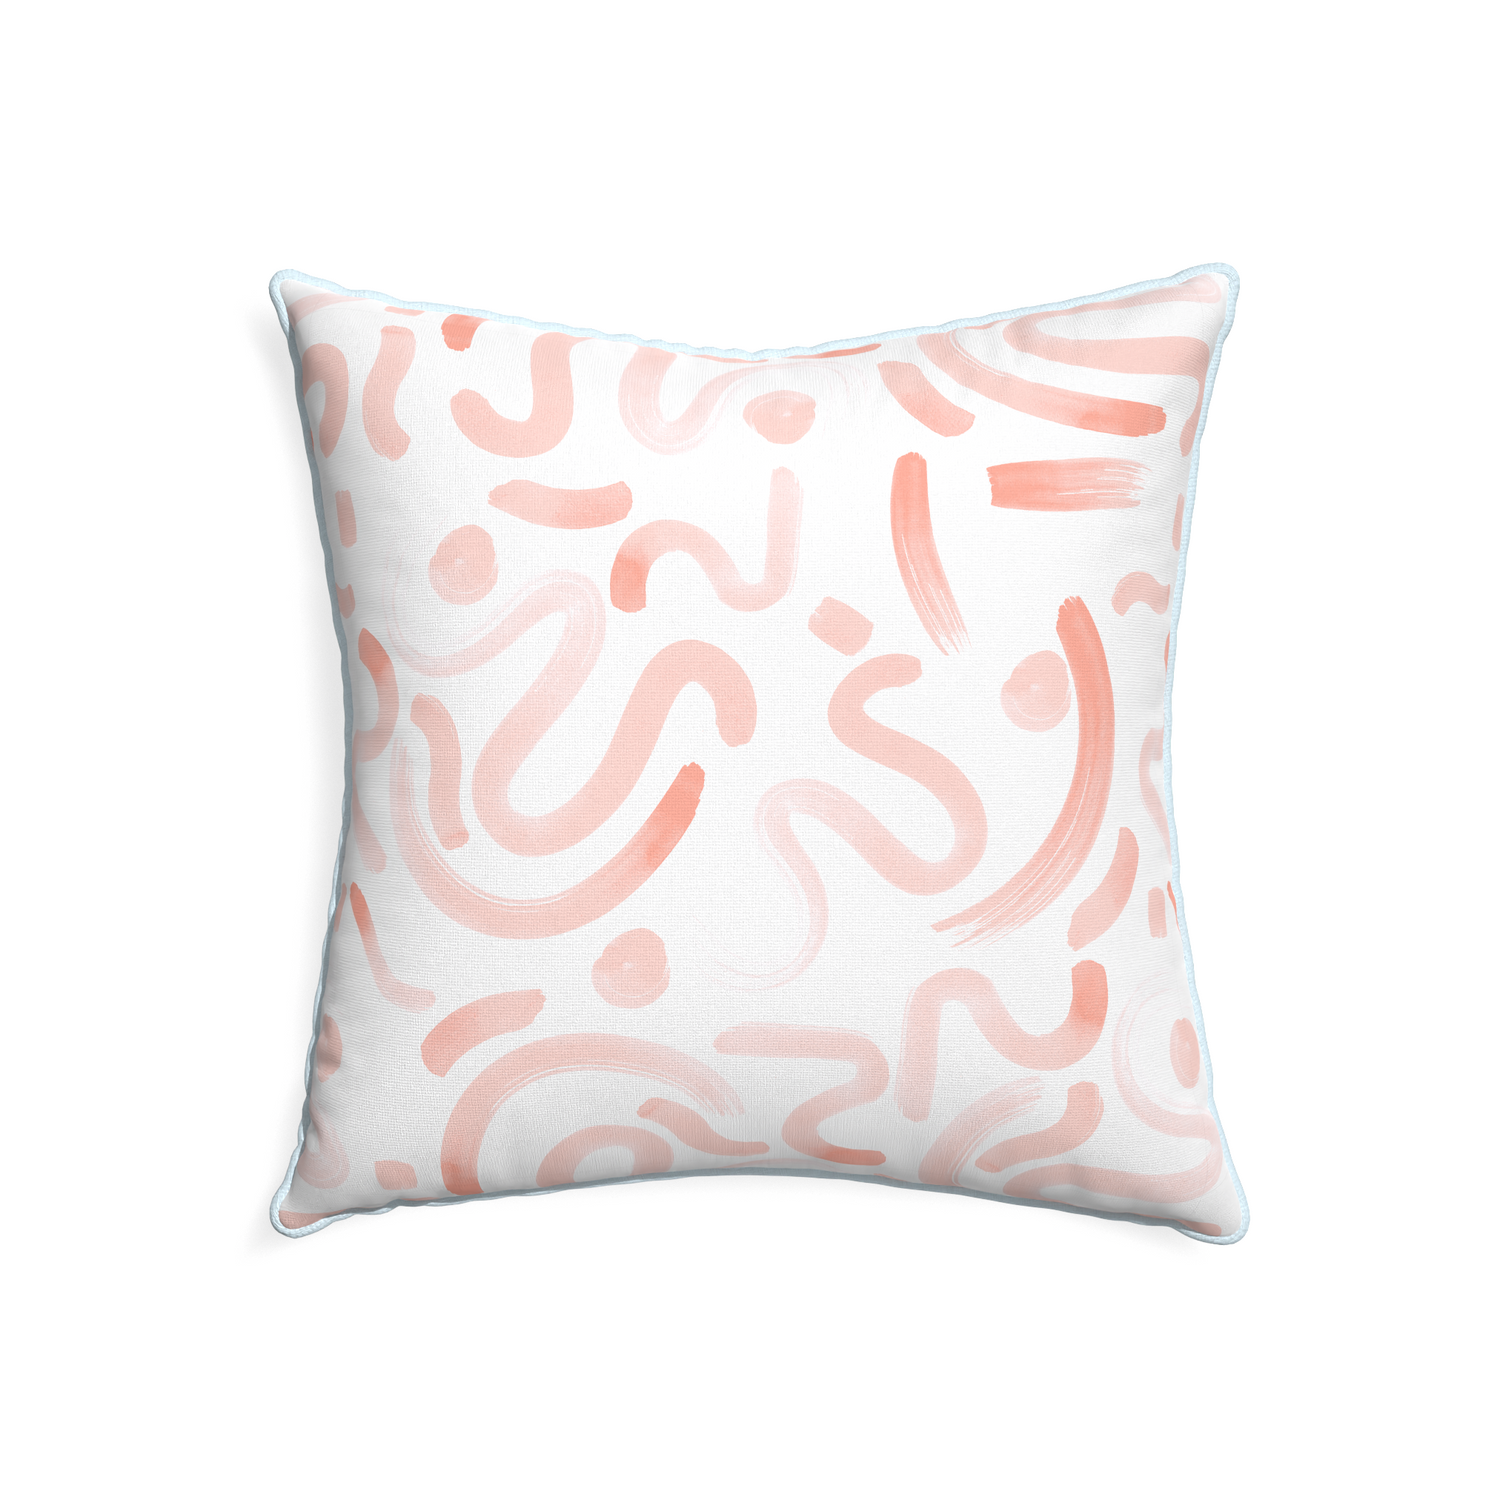 22-square hockney pink custom pillow with powder piping on white background